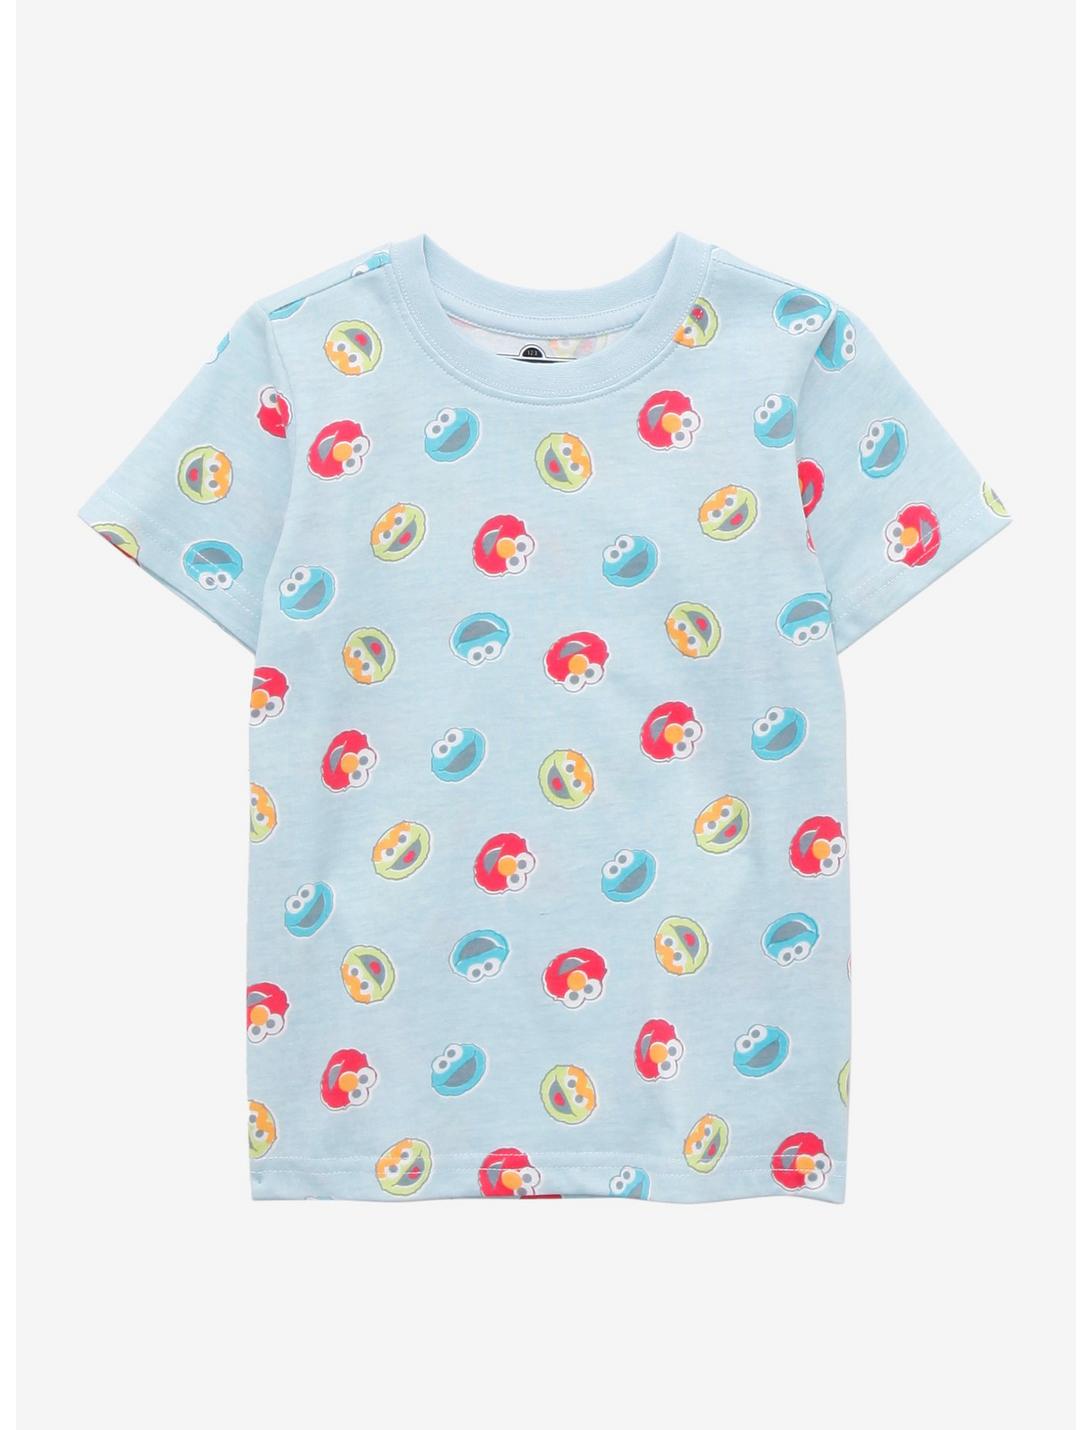 Sesame Street Monsters Toddler T-Shirt - BoxLunch Exclusive, LIGHT BLUE, hi-res